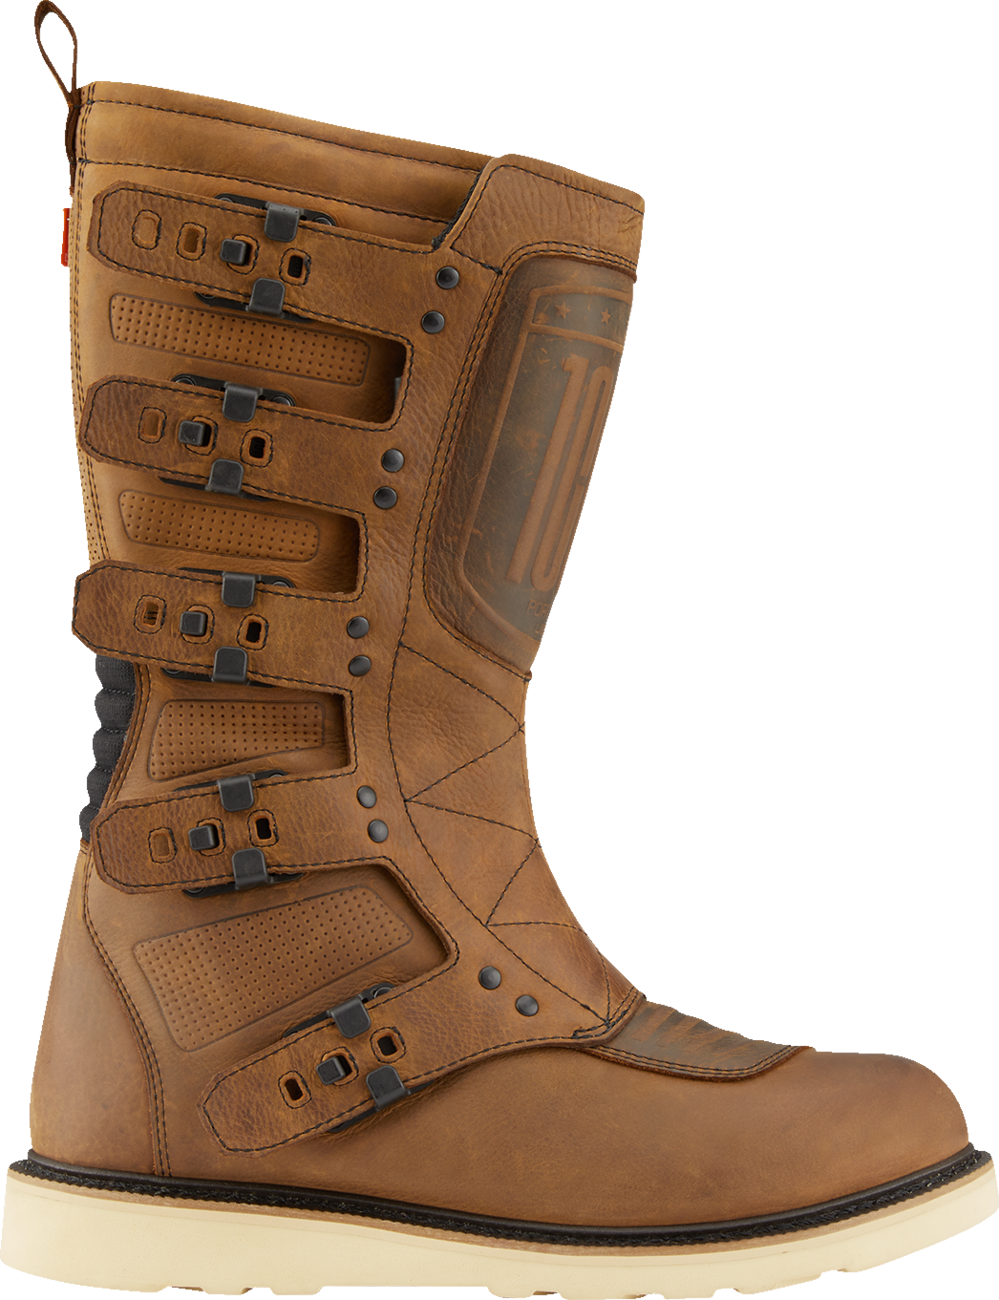 ICON Elsinore 2™ CE Boots - Brown - Size 11 3403-1227